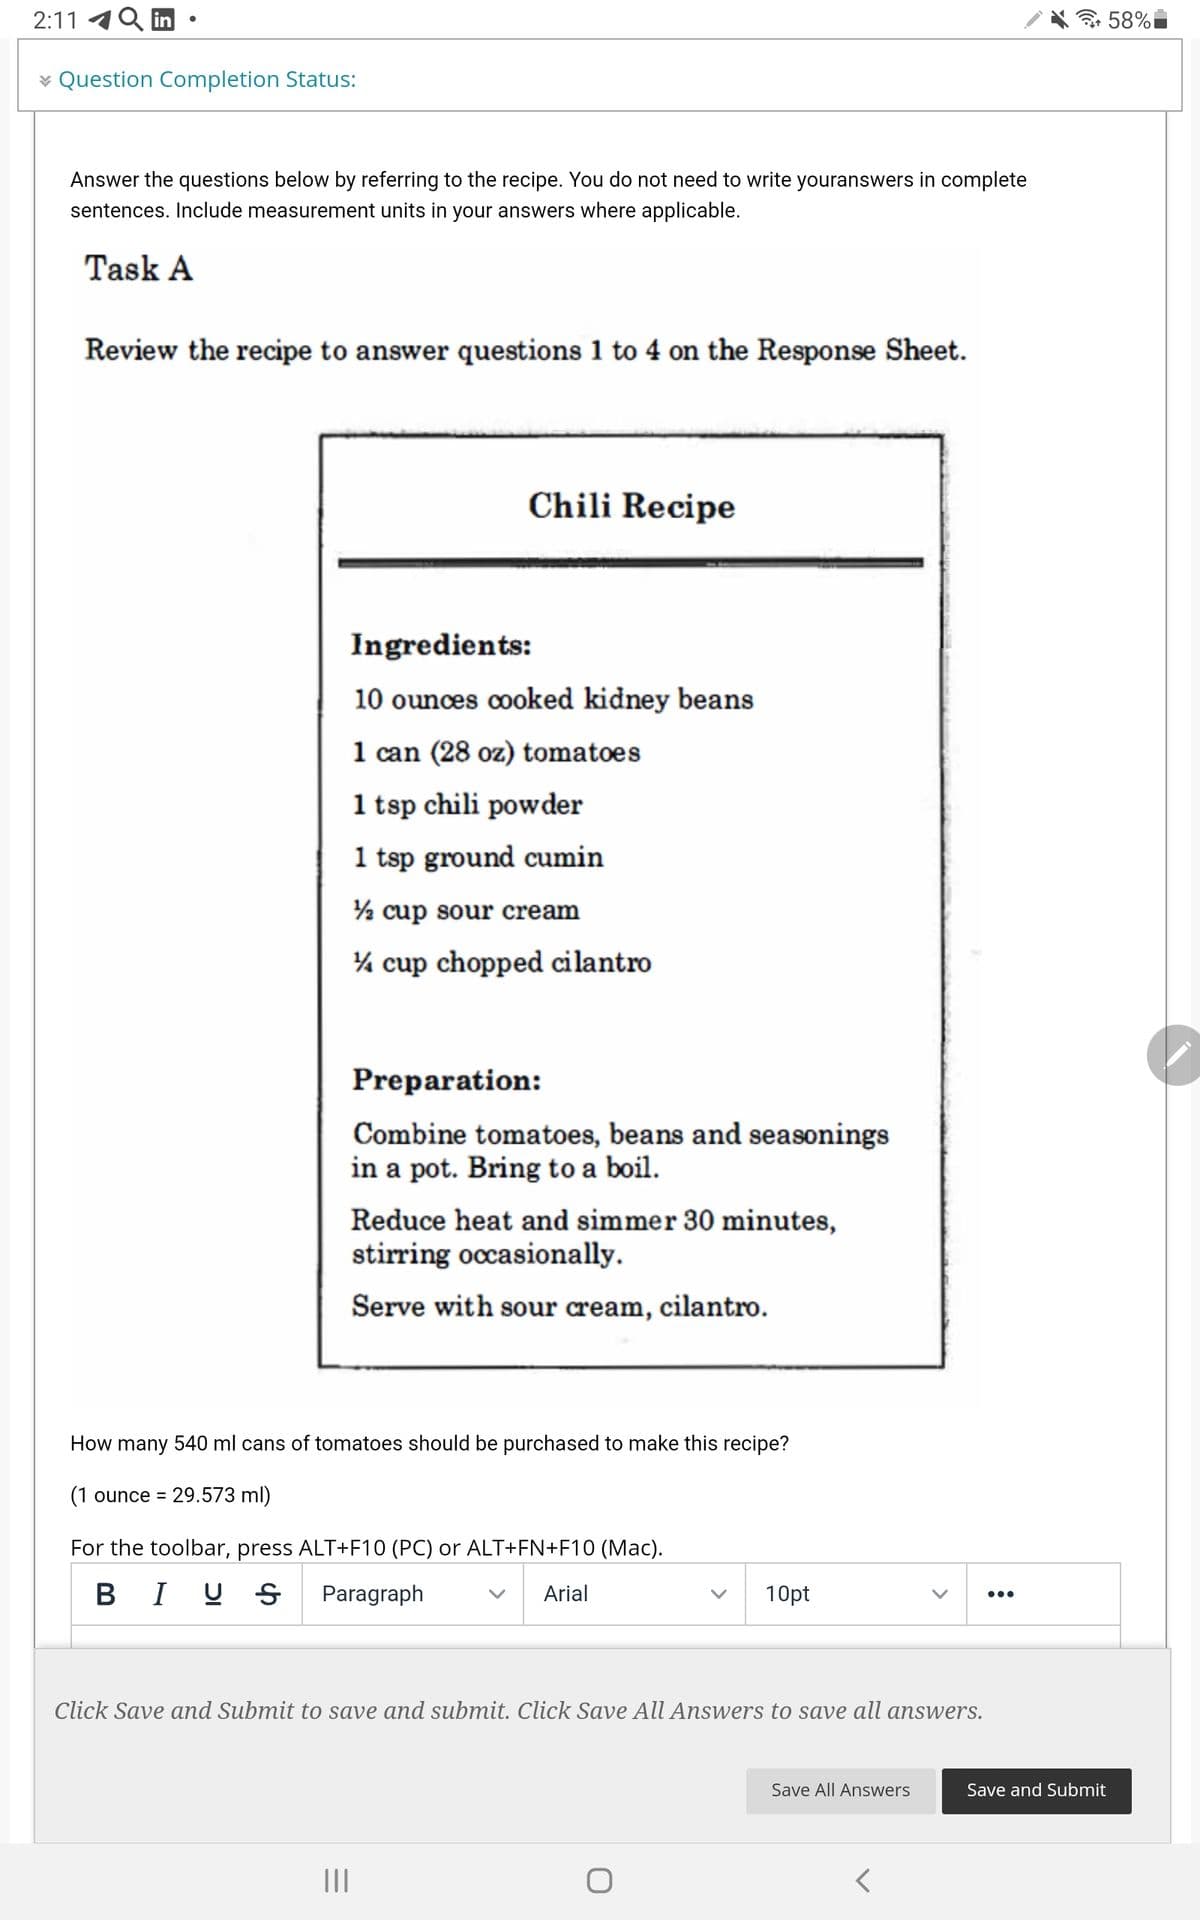 2:11 4
in
令58%
¥ Question Completion Status:
Answer the questions below by referring to the recipe. You do not need to write youranswers in complete
sentences. Include measurement units in your answers where applicable.
Task A
Review the recipe to answer questions 1 to 4 on the Response Sheet.
Chili Recipe
Ingredients:
10 ounces cooked kidney beans
1 can (28 oz) tomatoes
1 tsp chili powder
1 tsp ground cumin
½ cup sour cream
% cup chopped cilantro
Preparation:
Combine tomatoes, beans and seasonings
in a pot. Bring to a boil.
Reduce heat and simmer 30 minutes,
stirring occasionally.
Serve with sour cream, cilantro.
How many 540 ml cans of tomatoes should be purchased to make this recipe?
(1 ounce = 29.573 ml)
For the toolbar, press ALT+F10 (PC) or ALT+FN+F10 (Mac).
B I U S
Paragraph
Arial
10pt
•..
Click Save and Submit to save and submit. Click Save All Answers to save all answers.
Save All Answers
Save and Submit
II
>
